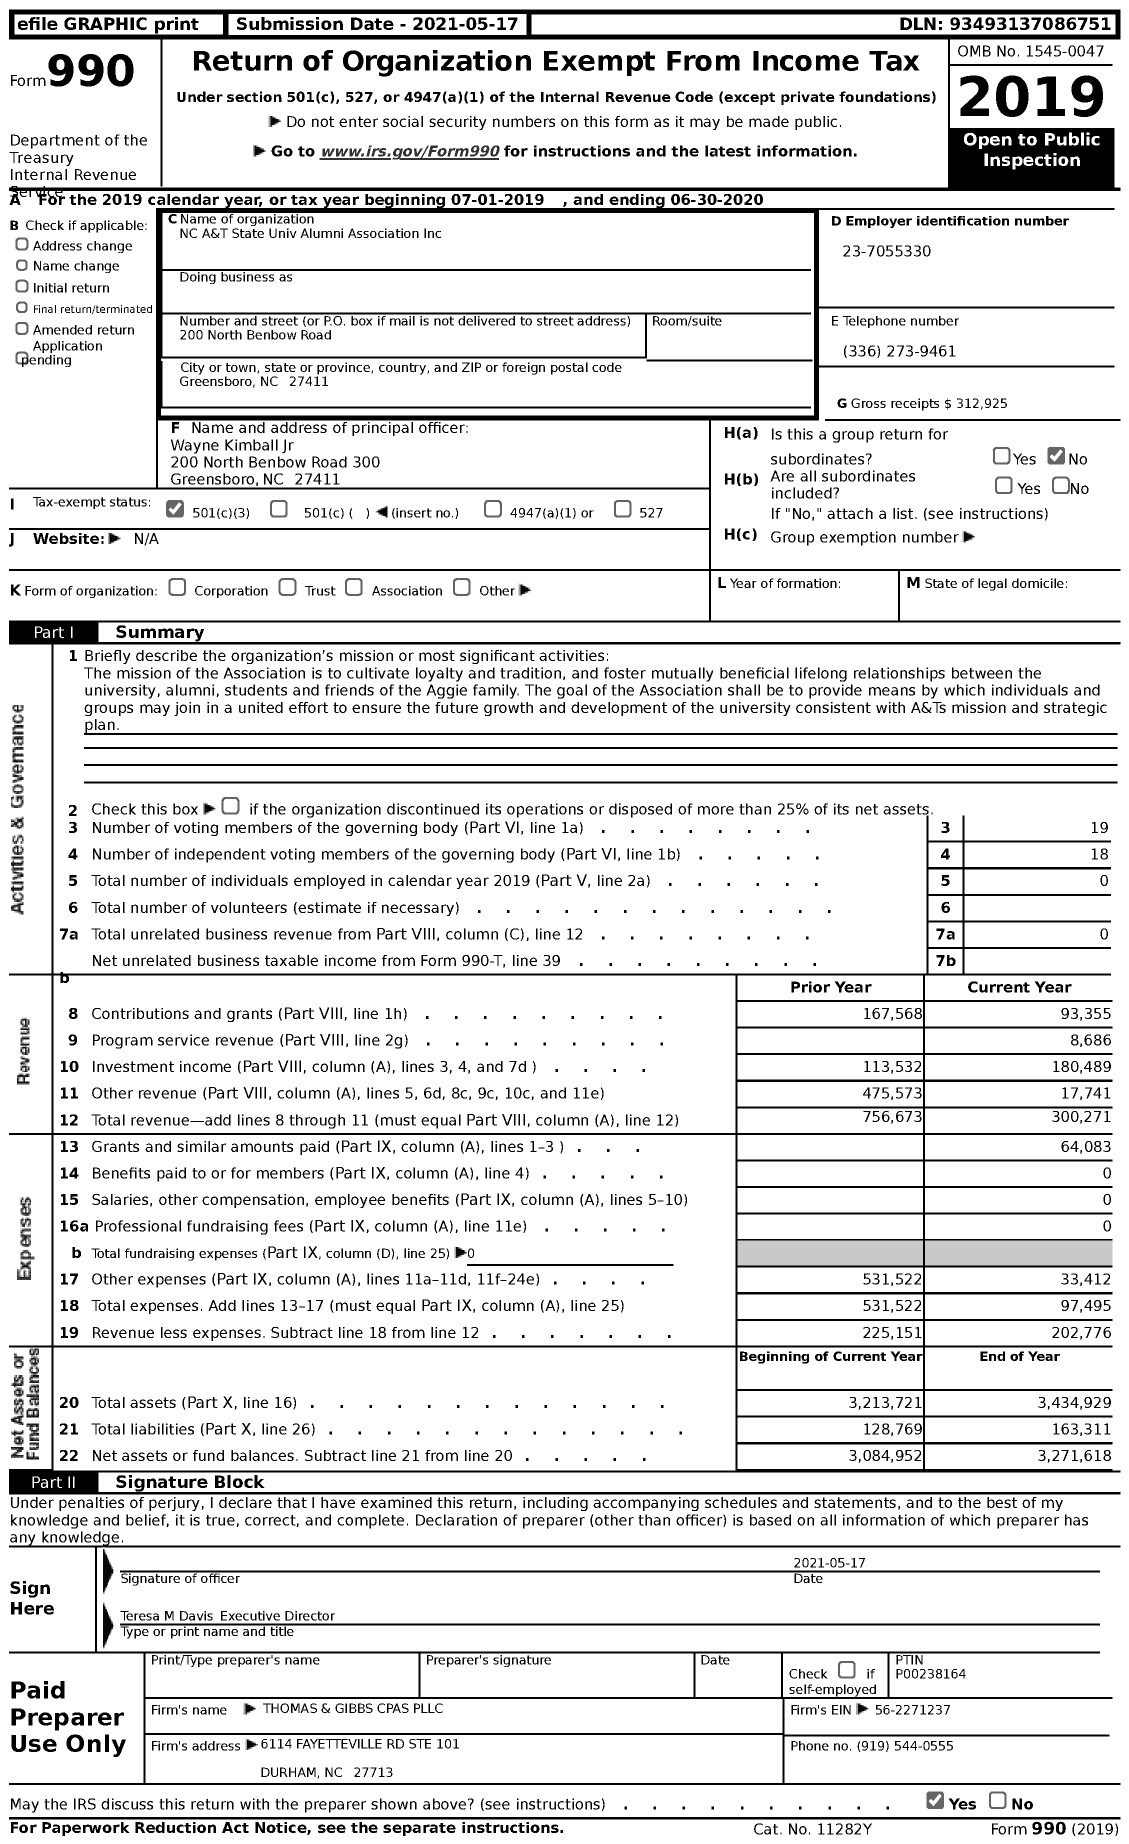 Image of first page of 2019 Form 990 for The Foundation for NC A&T State University